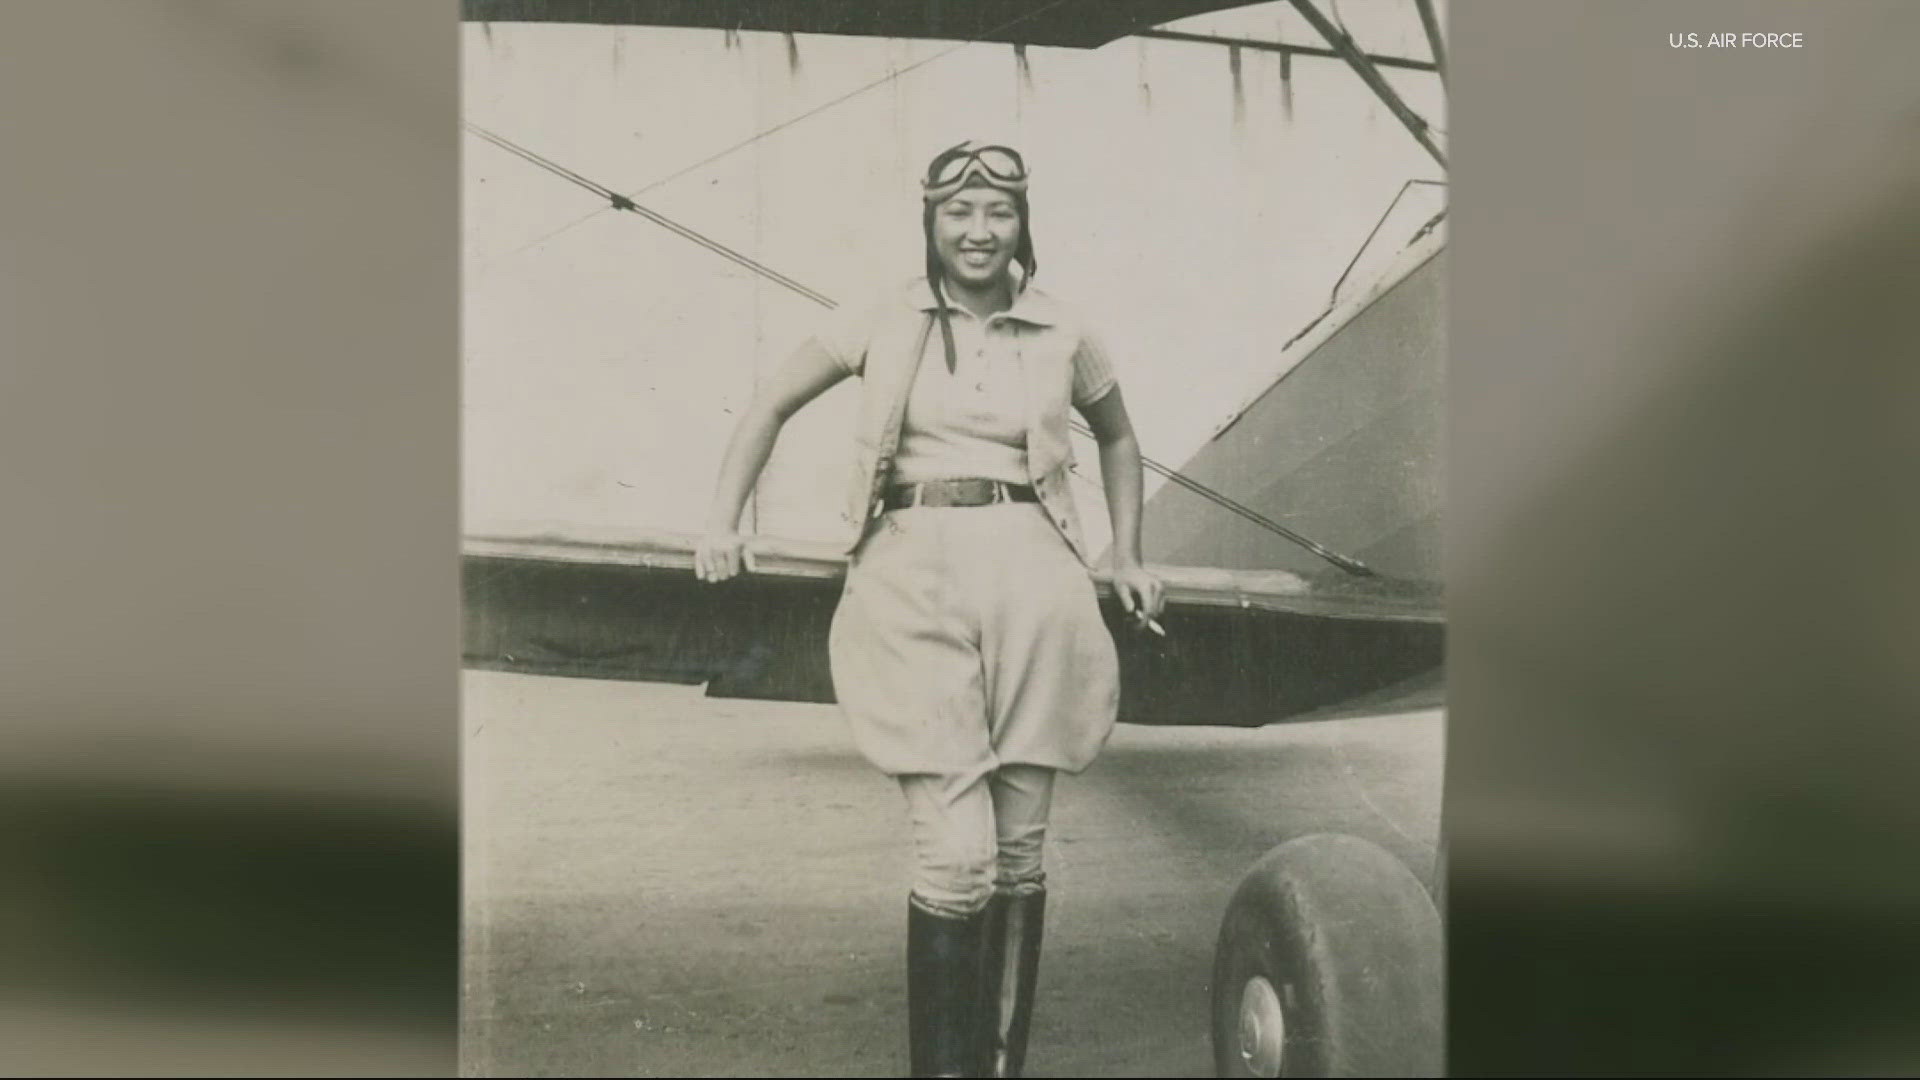 Hazel Ying Lee was one of only 1,074 pilots to be accepted into the Women Airforce Service Pilots program over the two years it was active during WWII.